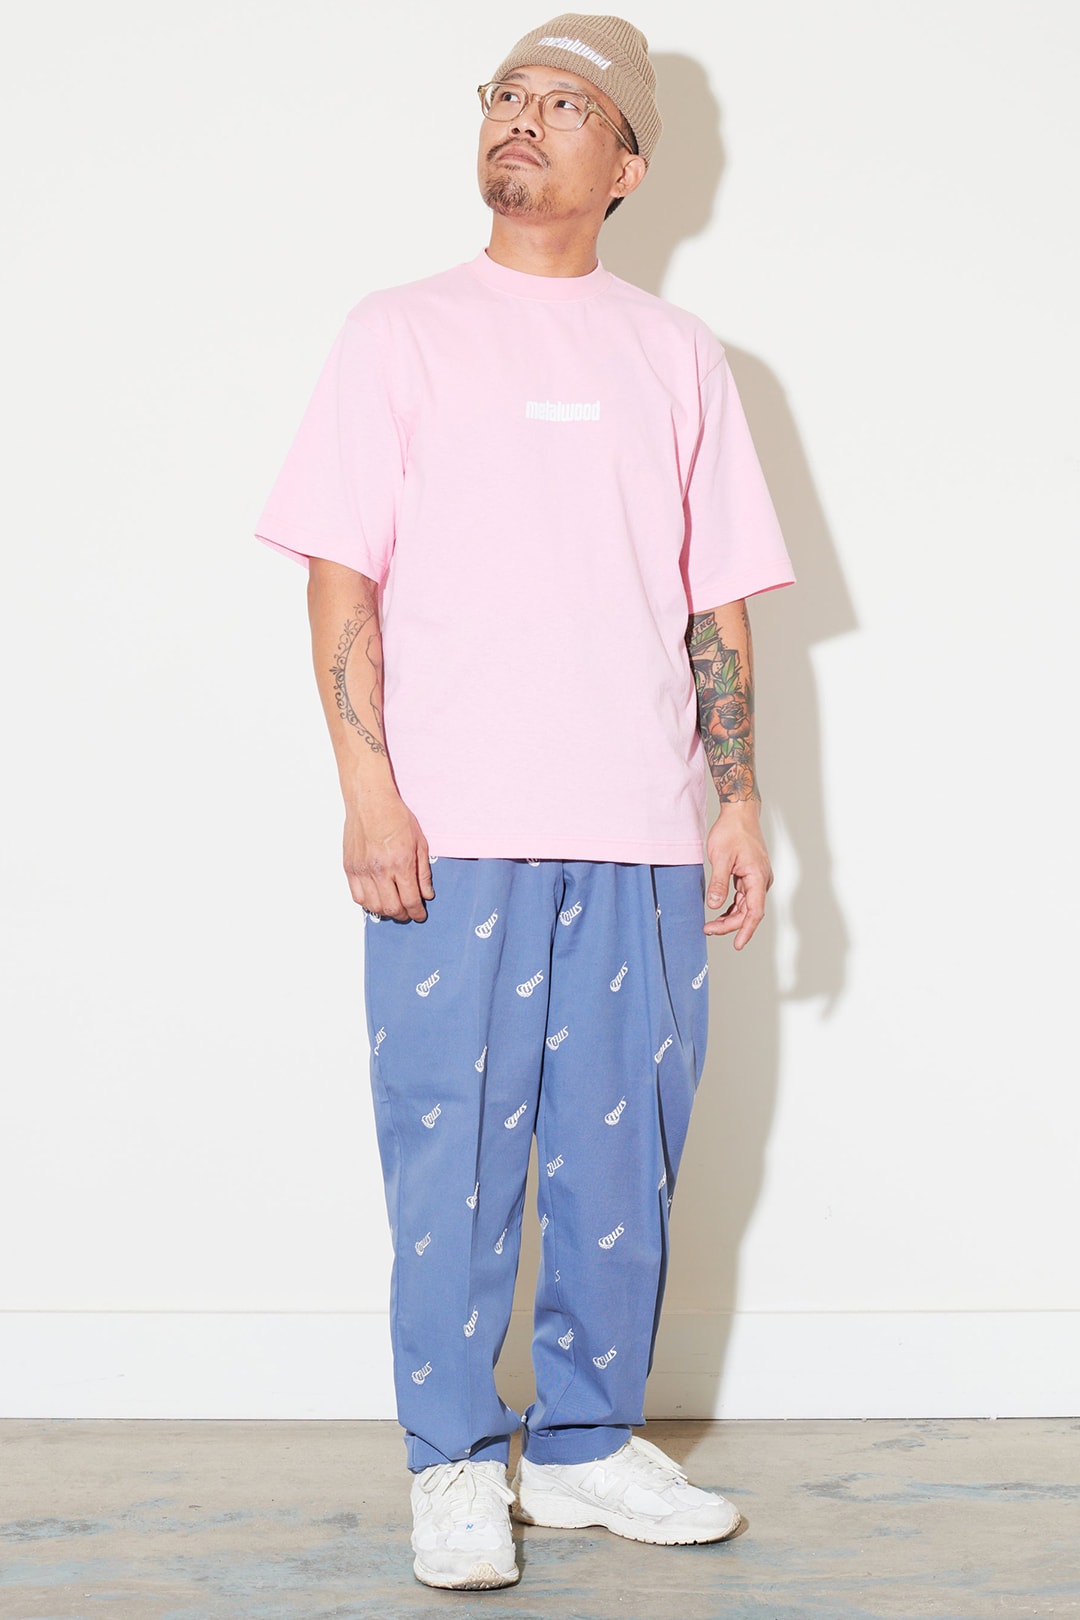 Metalwood Studio  Spring 2022 Capsule Collection First Delivery